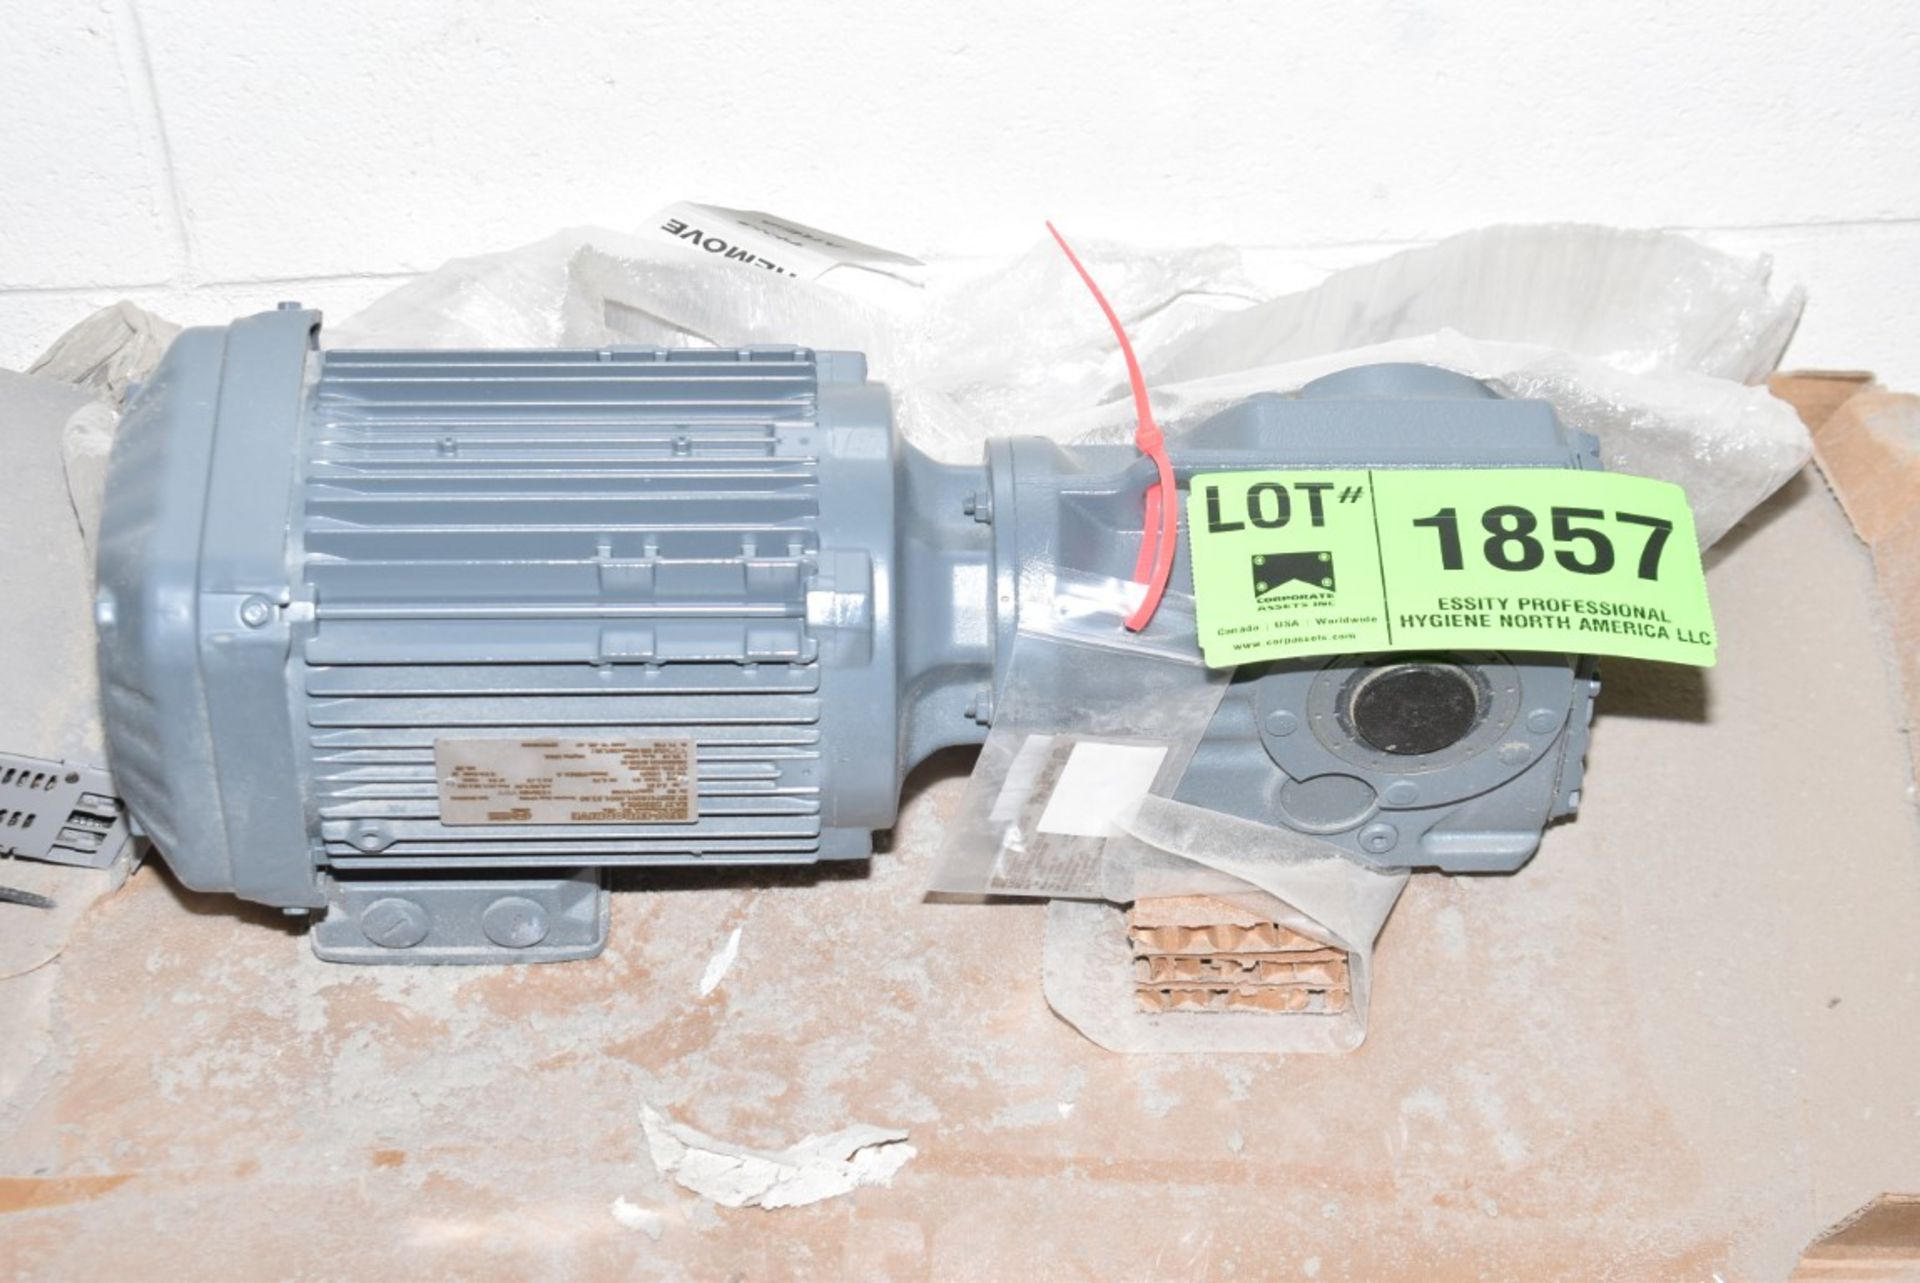 LOT/ SEW EURODRIVE 2 HP ELECTRIC MOTOR WITH GEARBOX, 1800 MAX. RPM, 230/460V, 3PH, 60HZ & RUBBER - Image 2 of 3